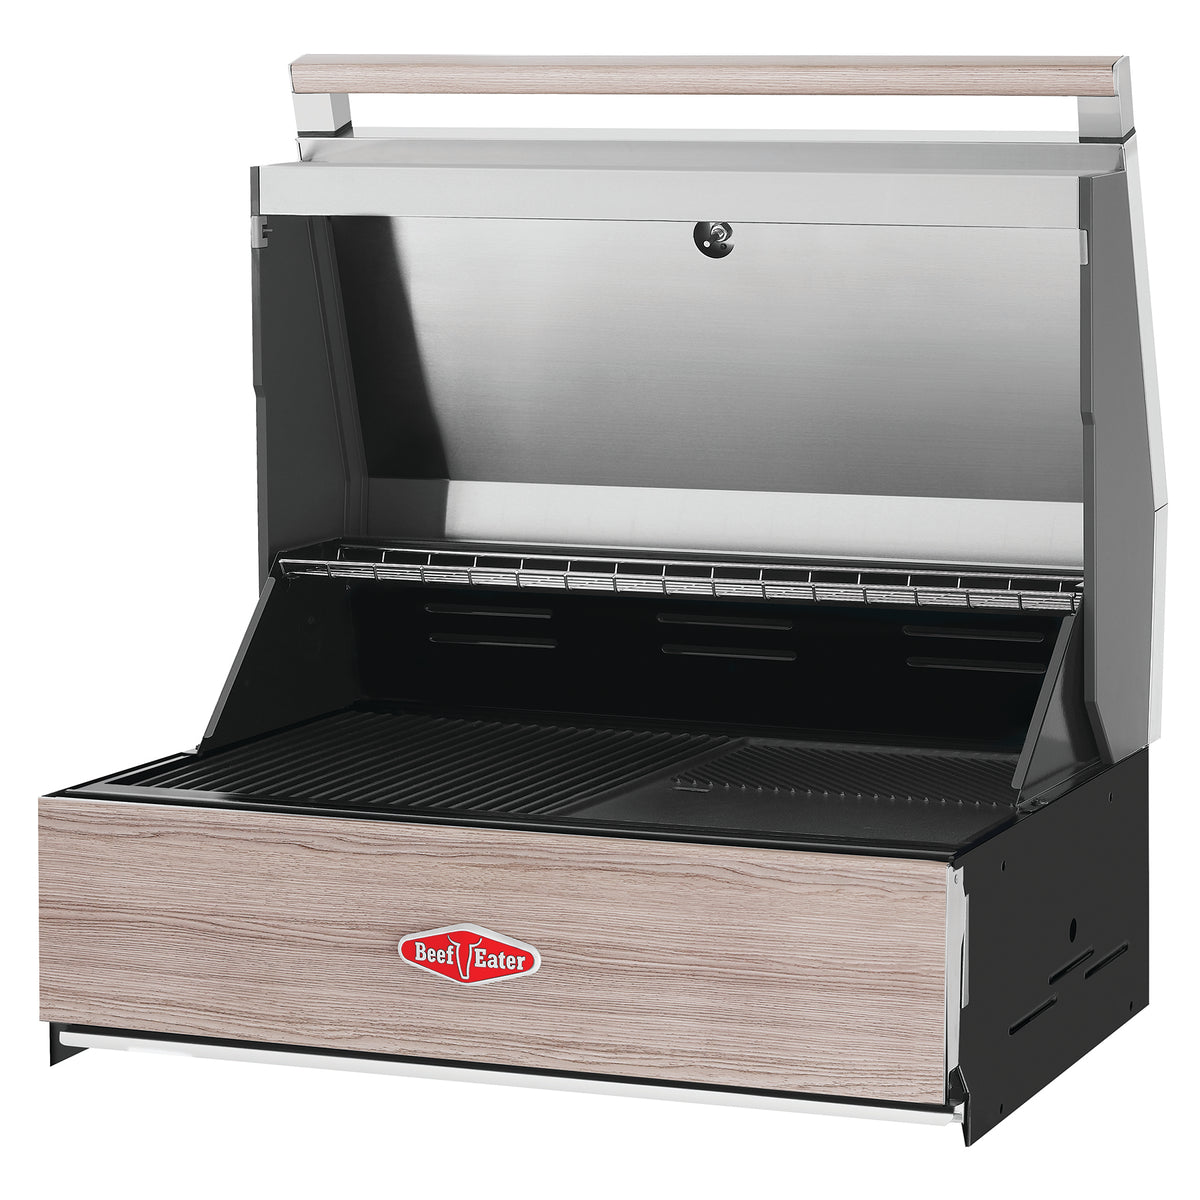 BeefEater 1500 Series 4 Burner Build-in Gas Barbecue